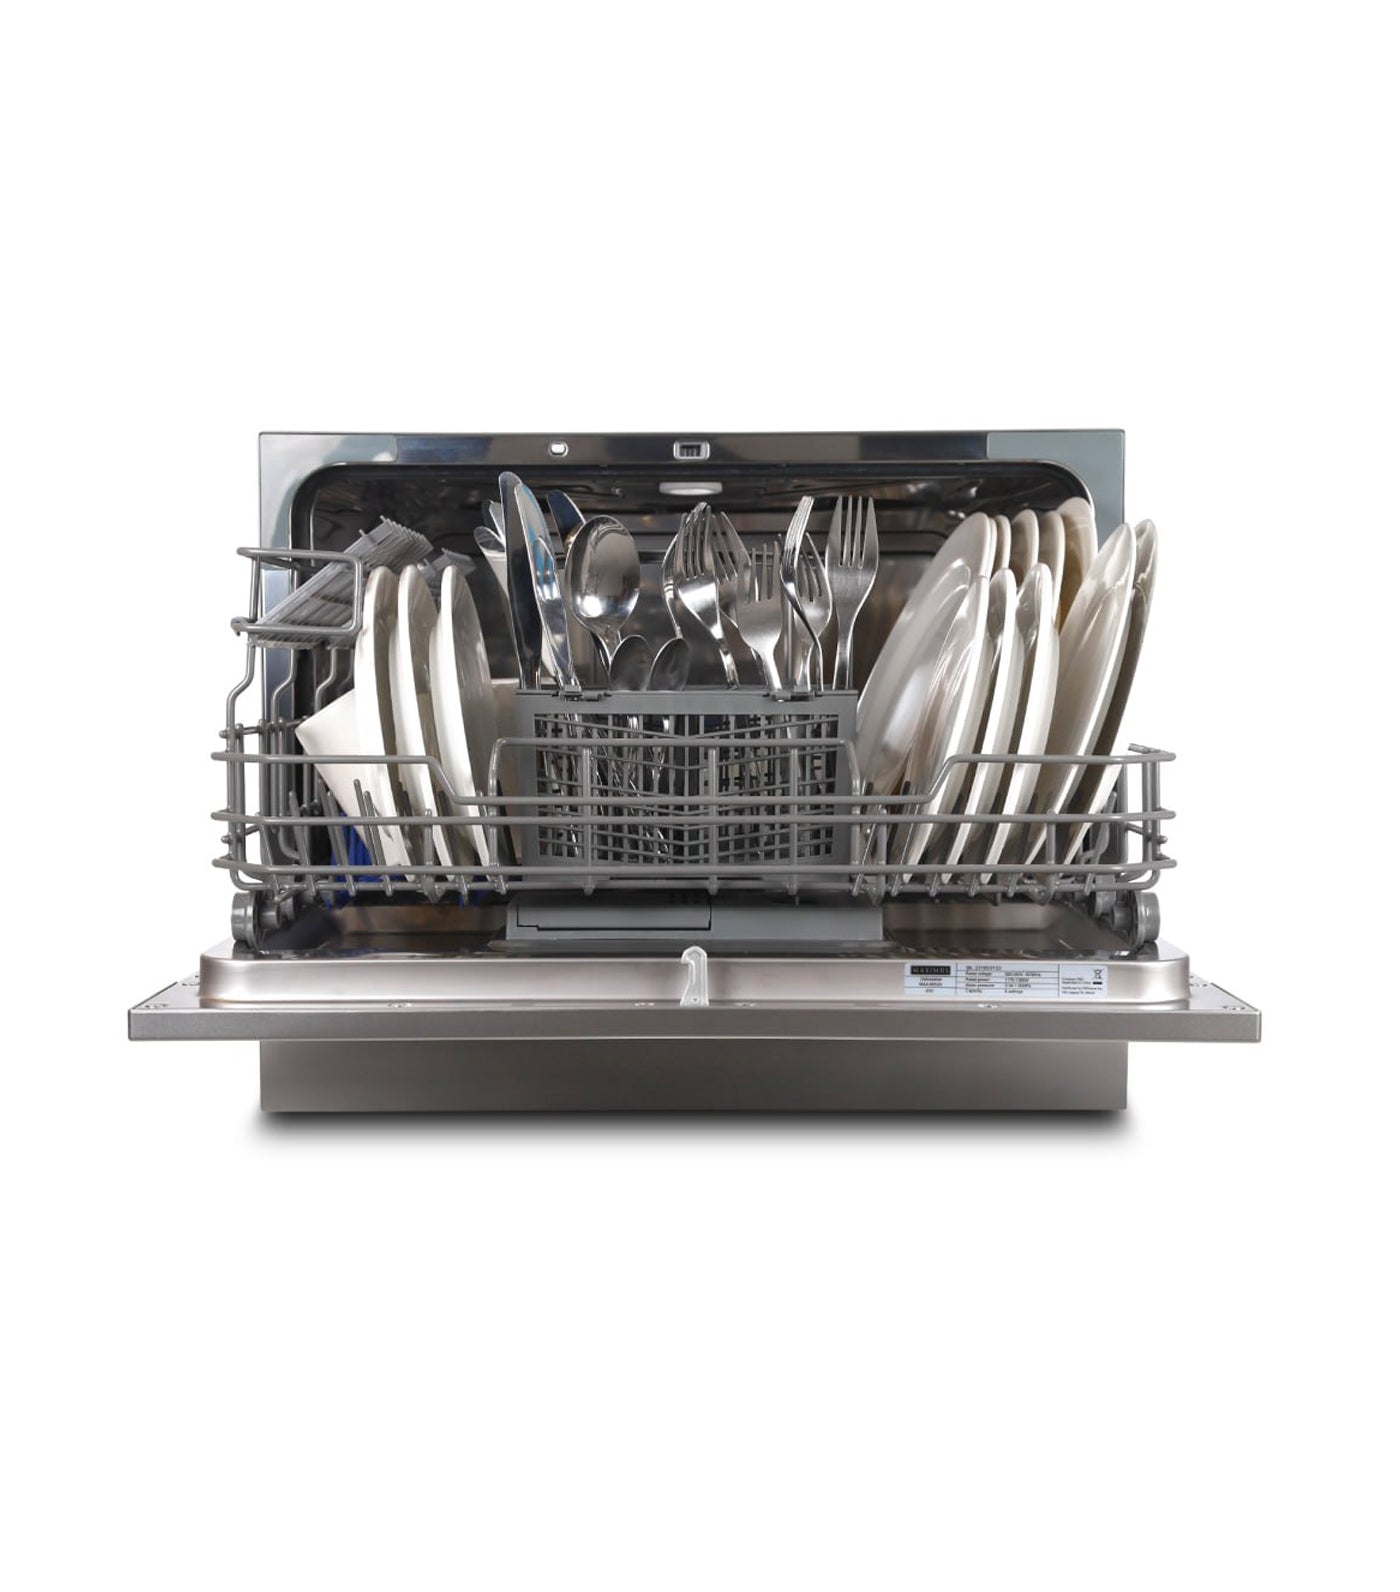 Maximus Tabletop Dishwasher with UV - Stainless Steel